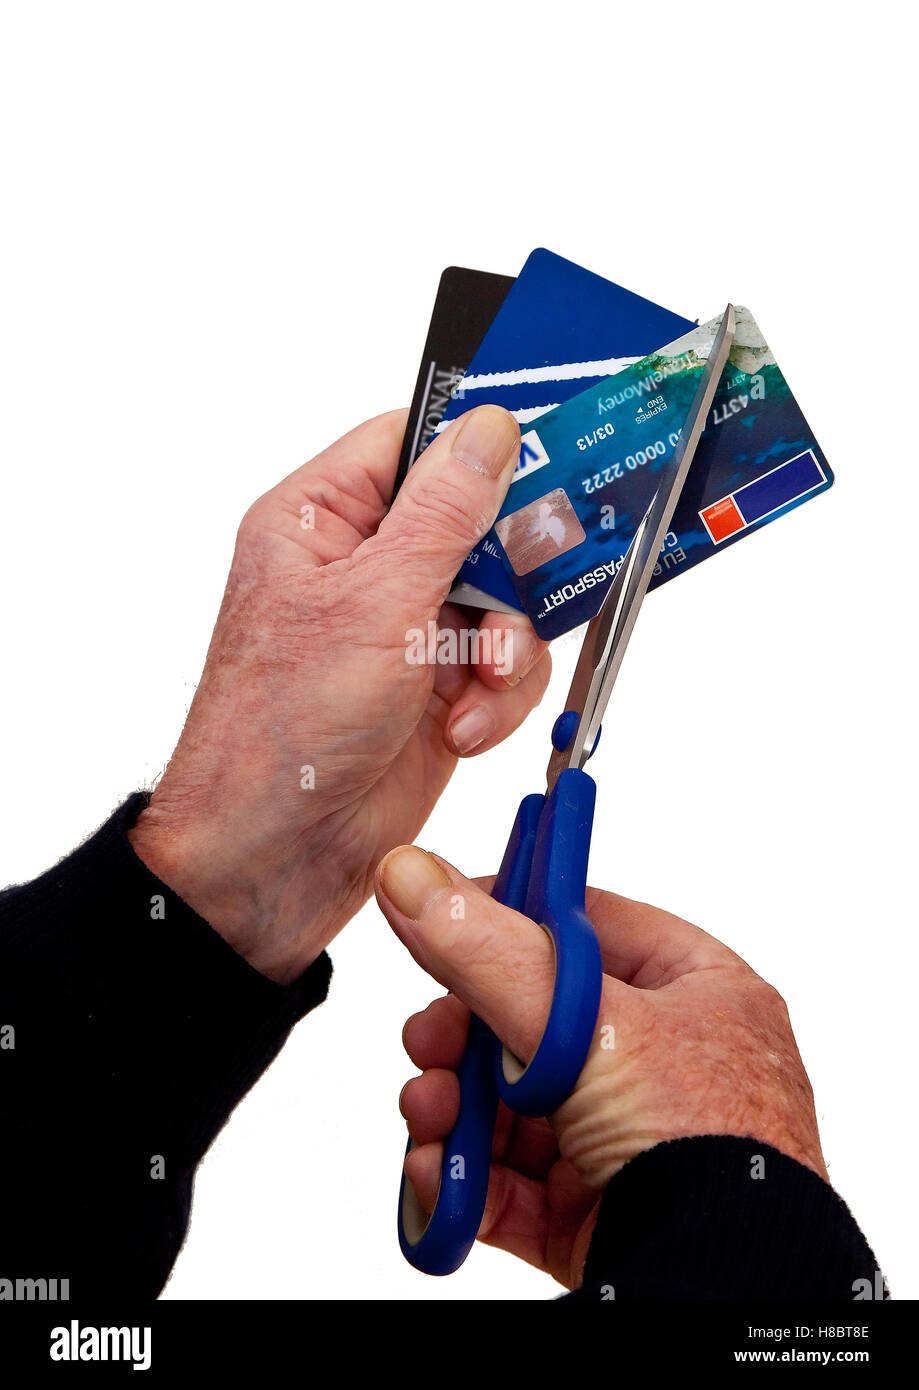 Cutting up credit cards with scissors to remove temptation Stock Photo